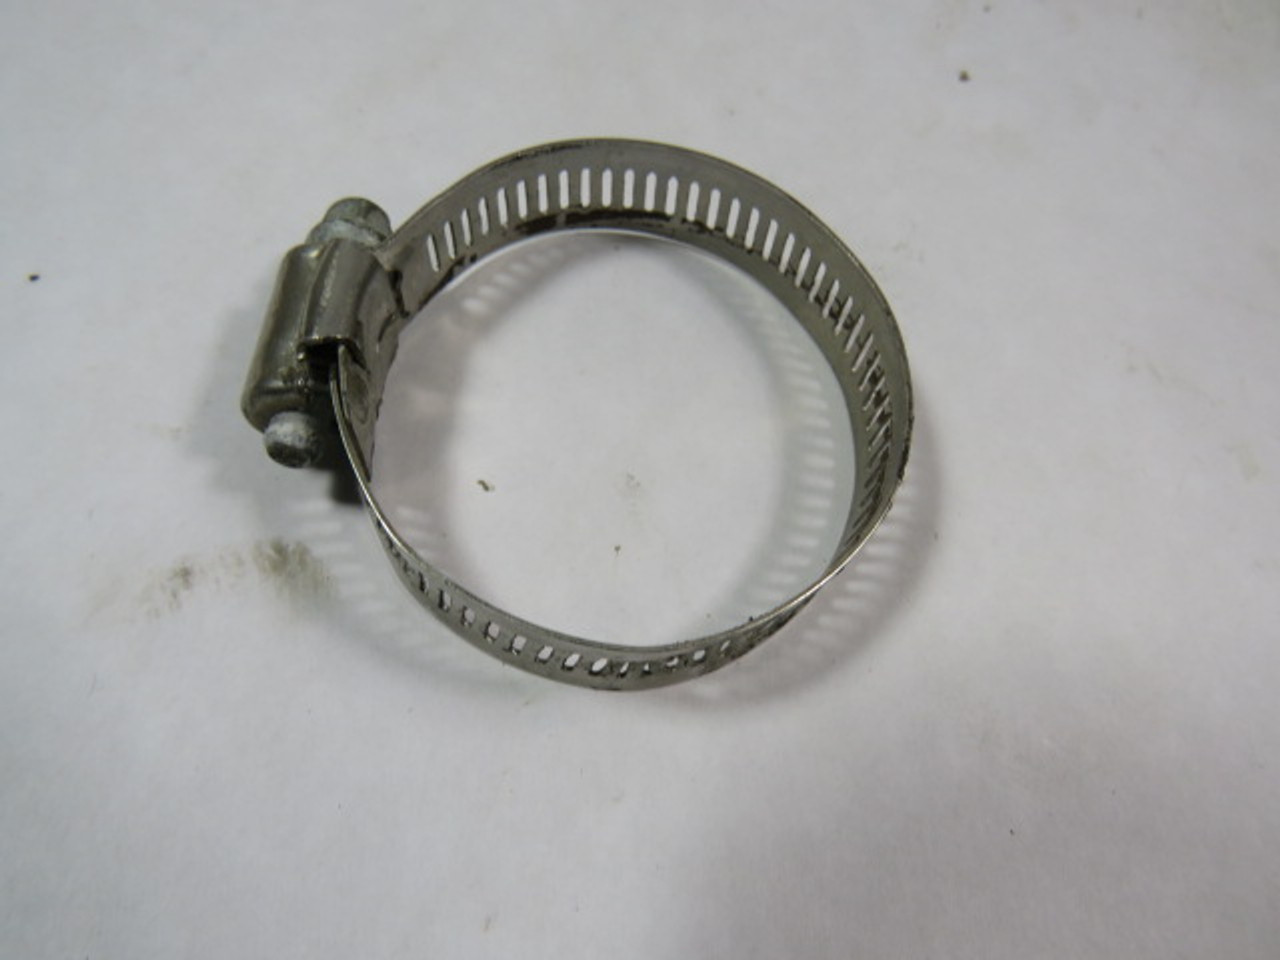 Ideal 25-51 Adjustable Stainless Steel Clamp 25-51mm USED